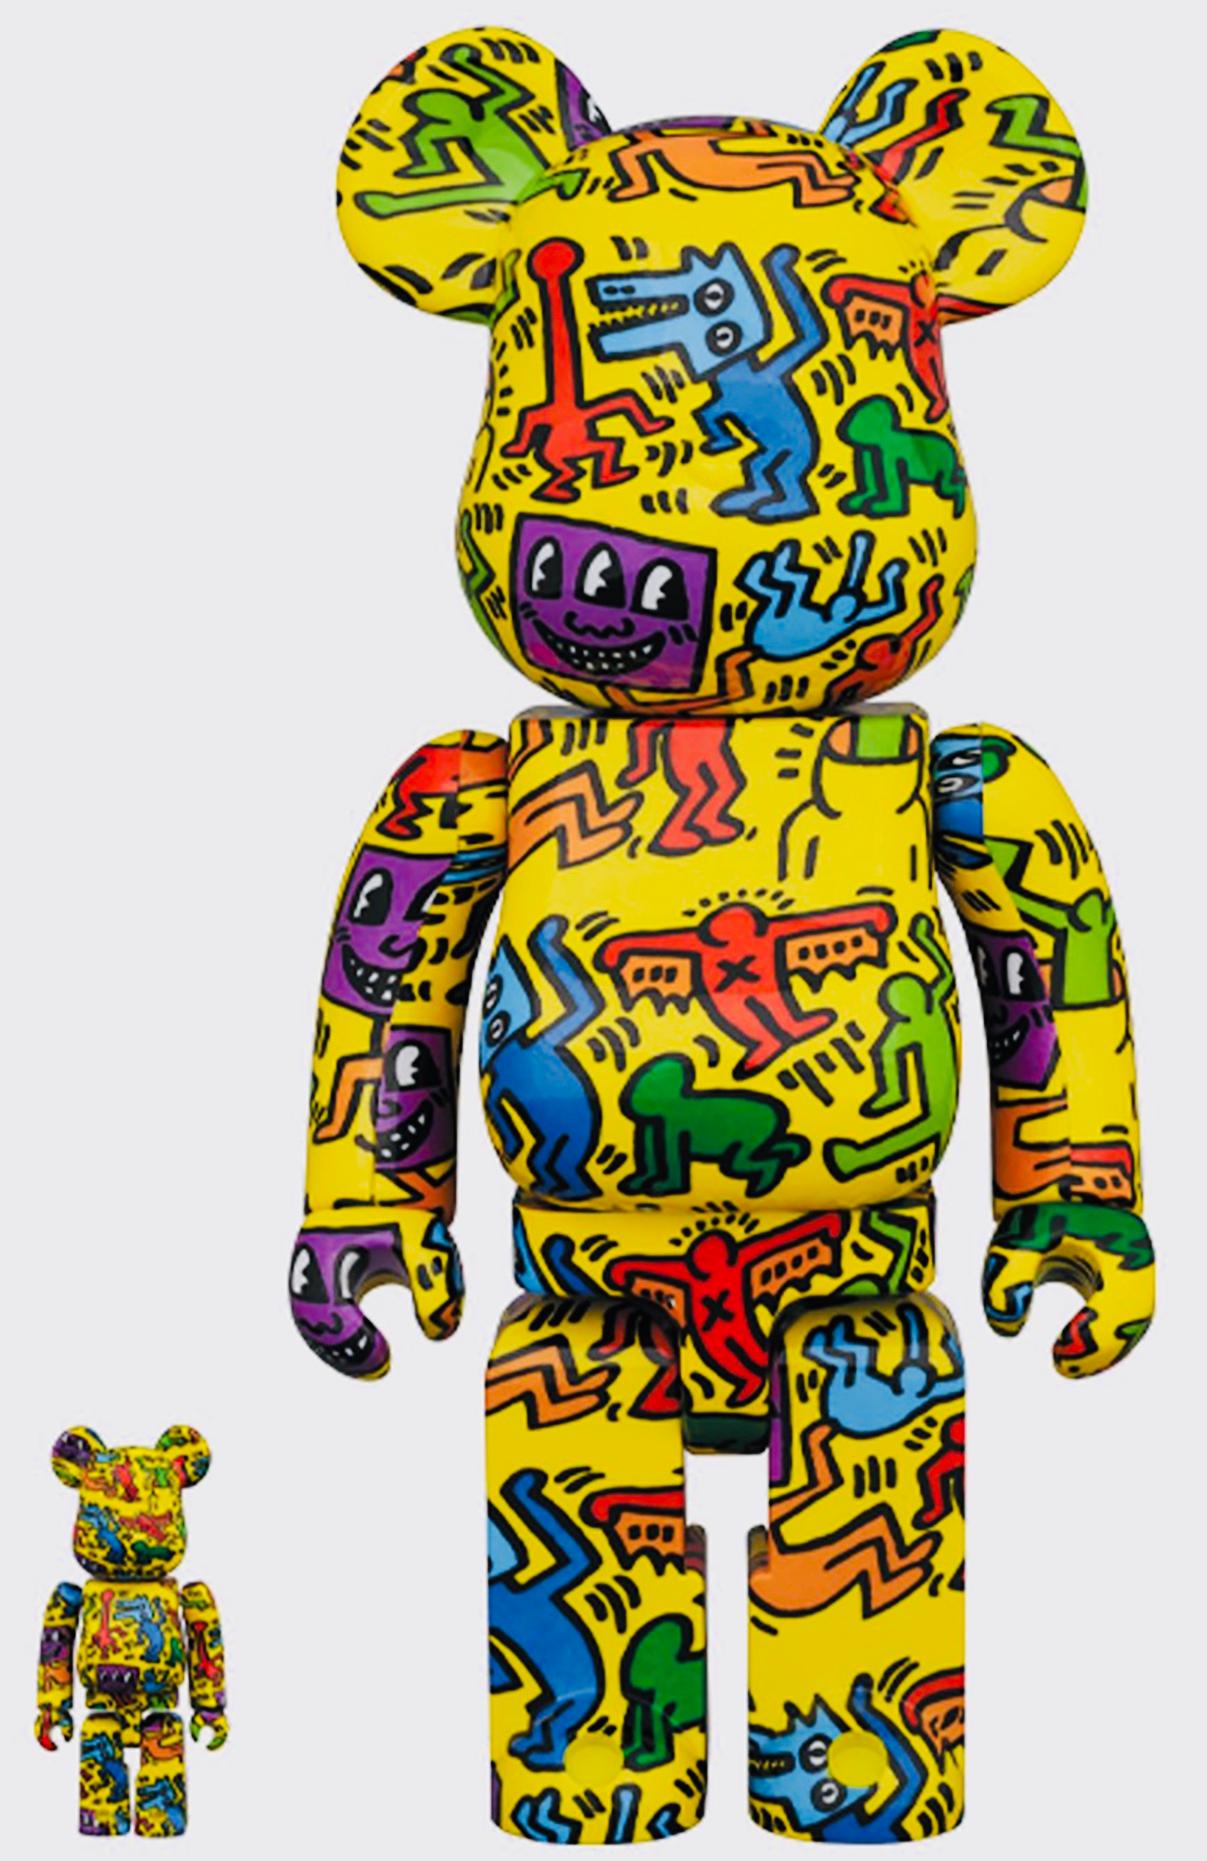 (after) Keith Haring Figurative Sculpture - Keith Haring Bearbrick 400% figure (Haring BE@RBRICK)